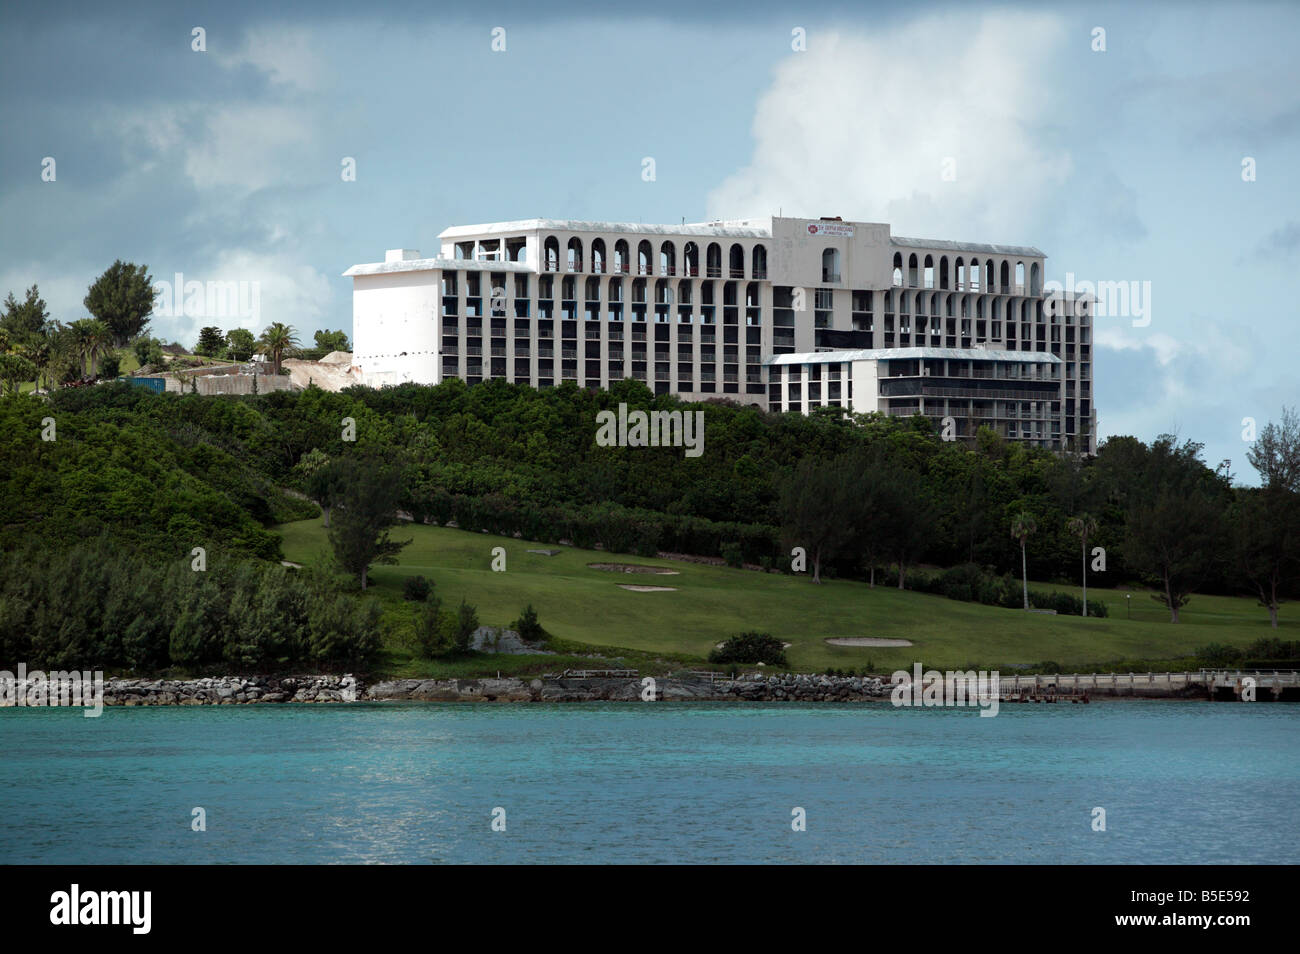 Shot of the Old Club Med Hotel prepared for demolition by implosion on 25.08.2008 Stock Photo